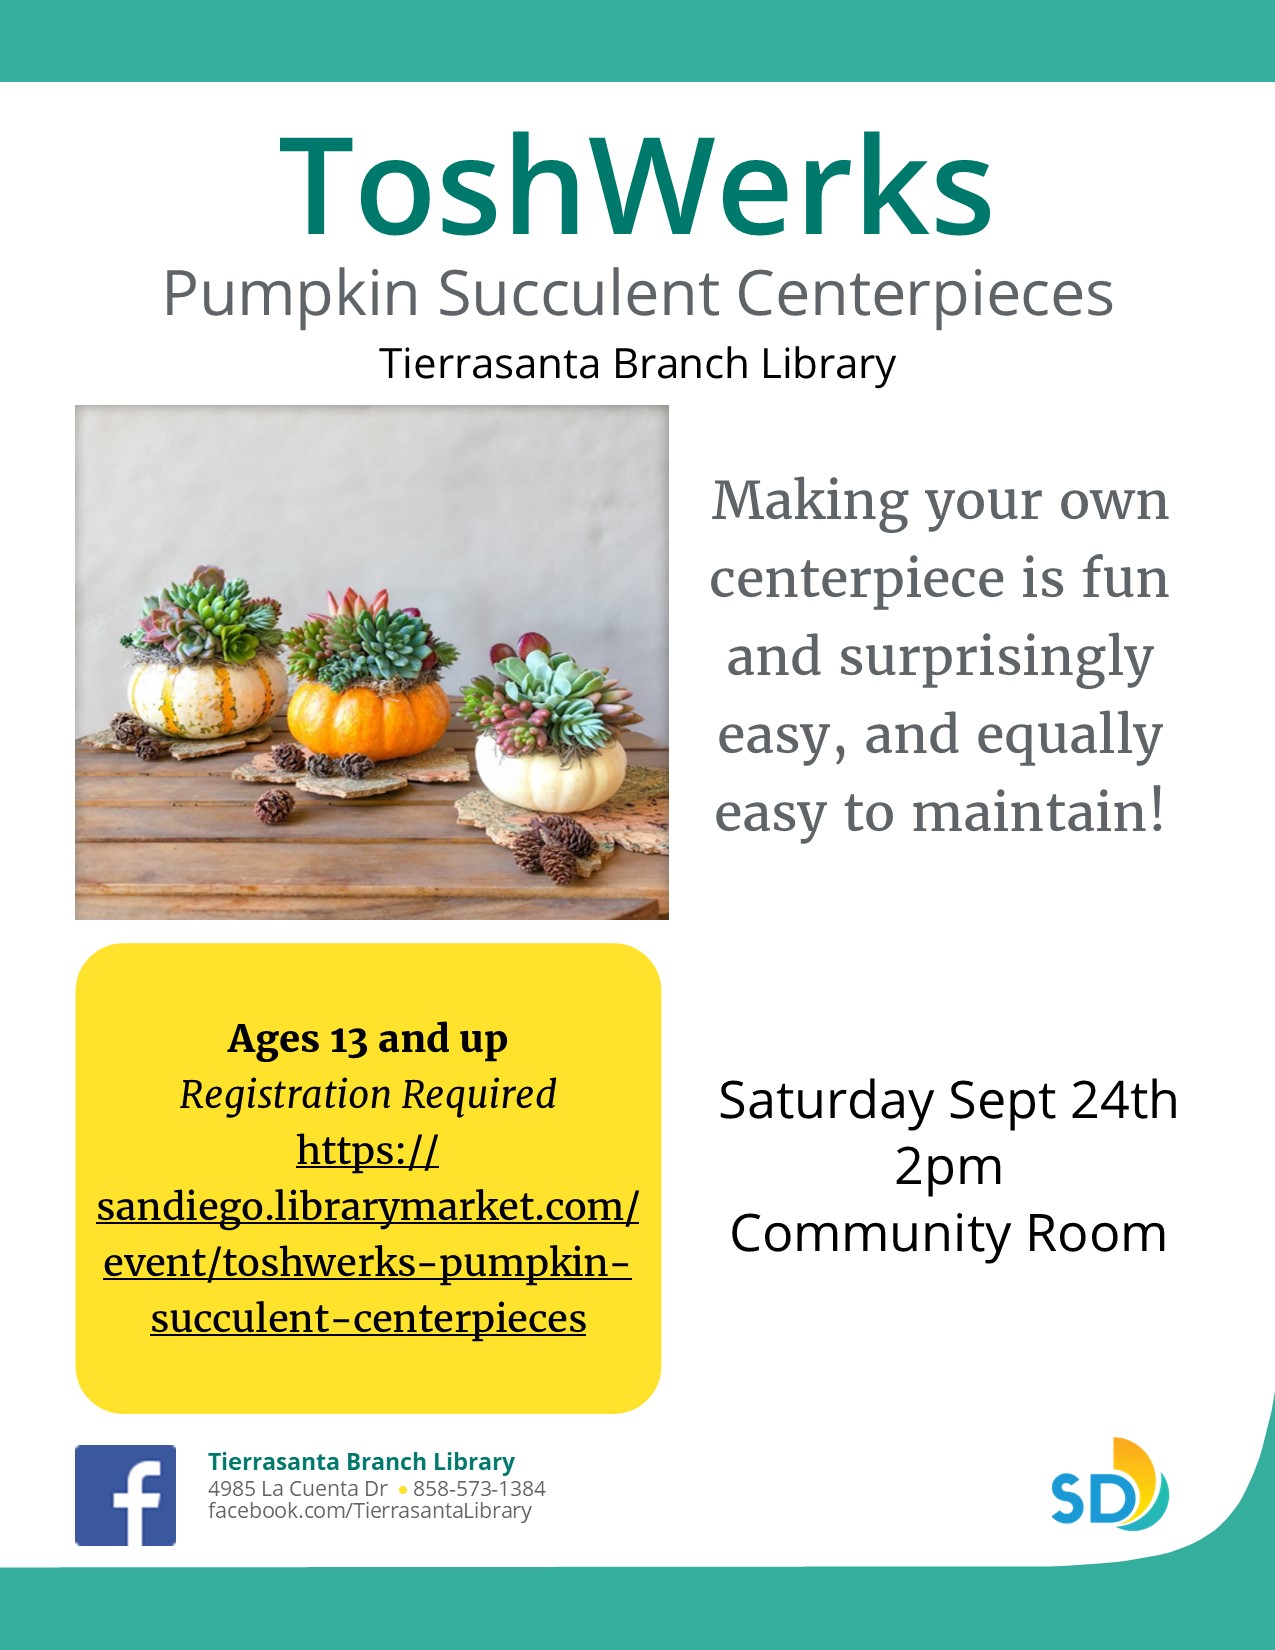 Flyer with a picture of pumpkin succulent centerpieces